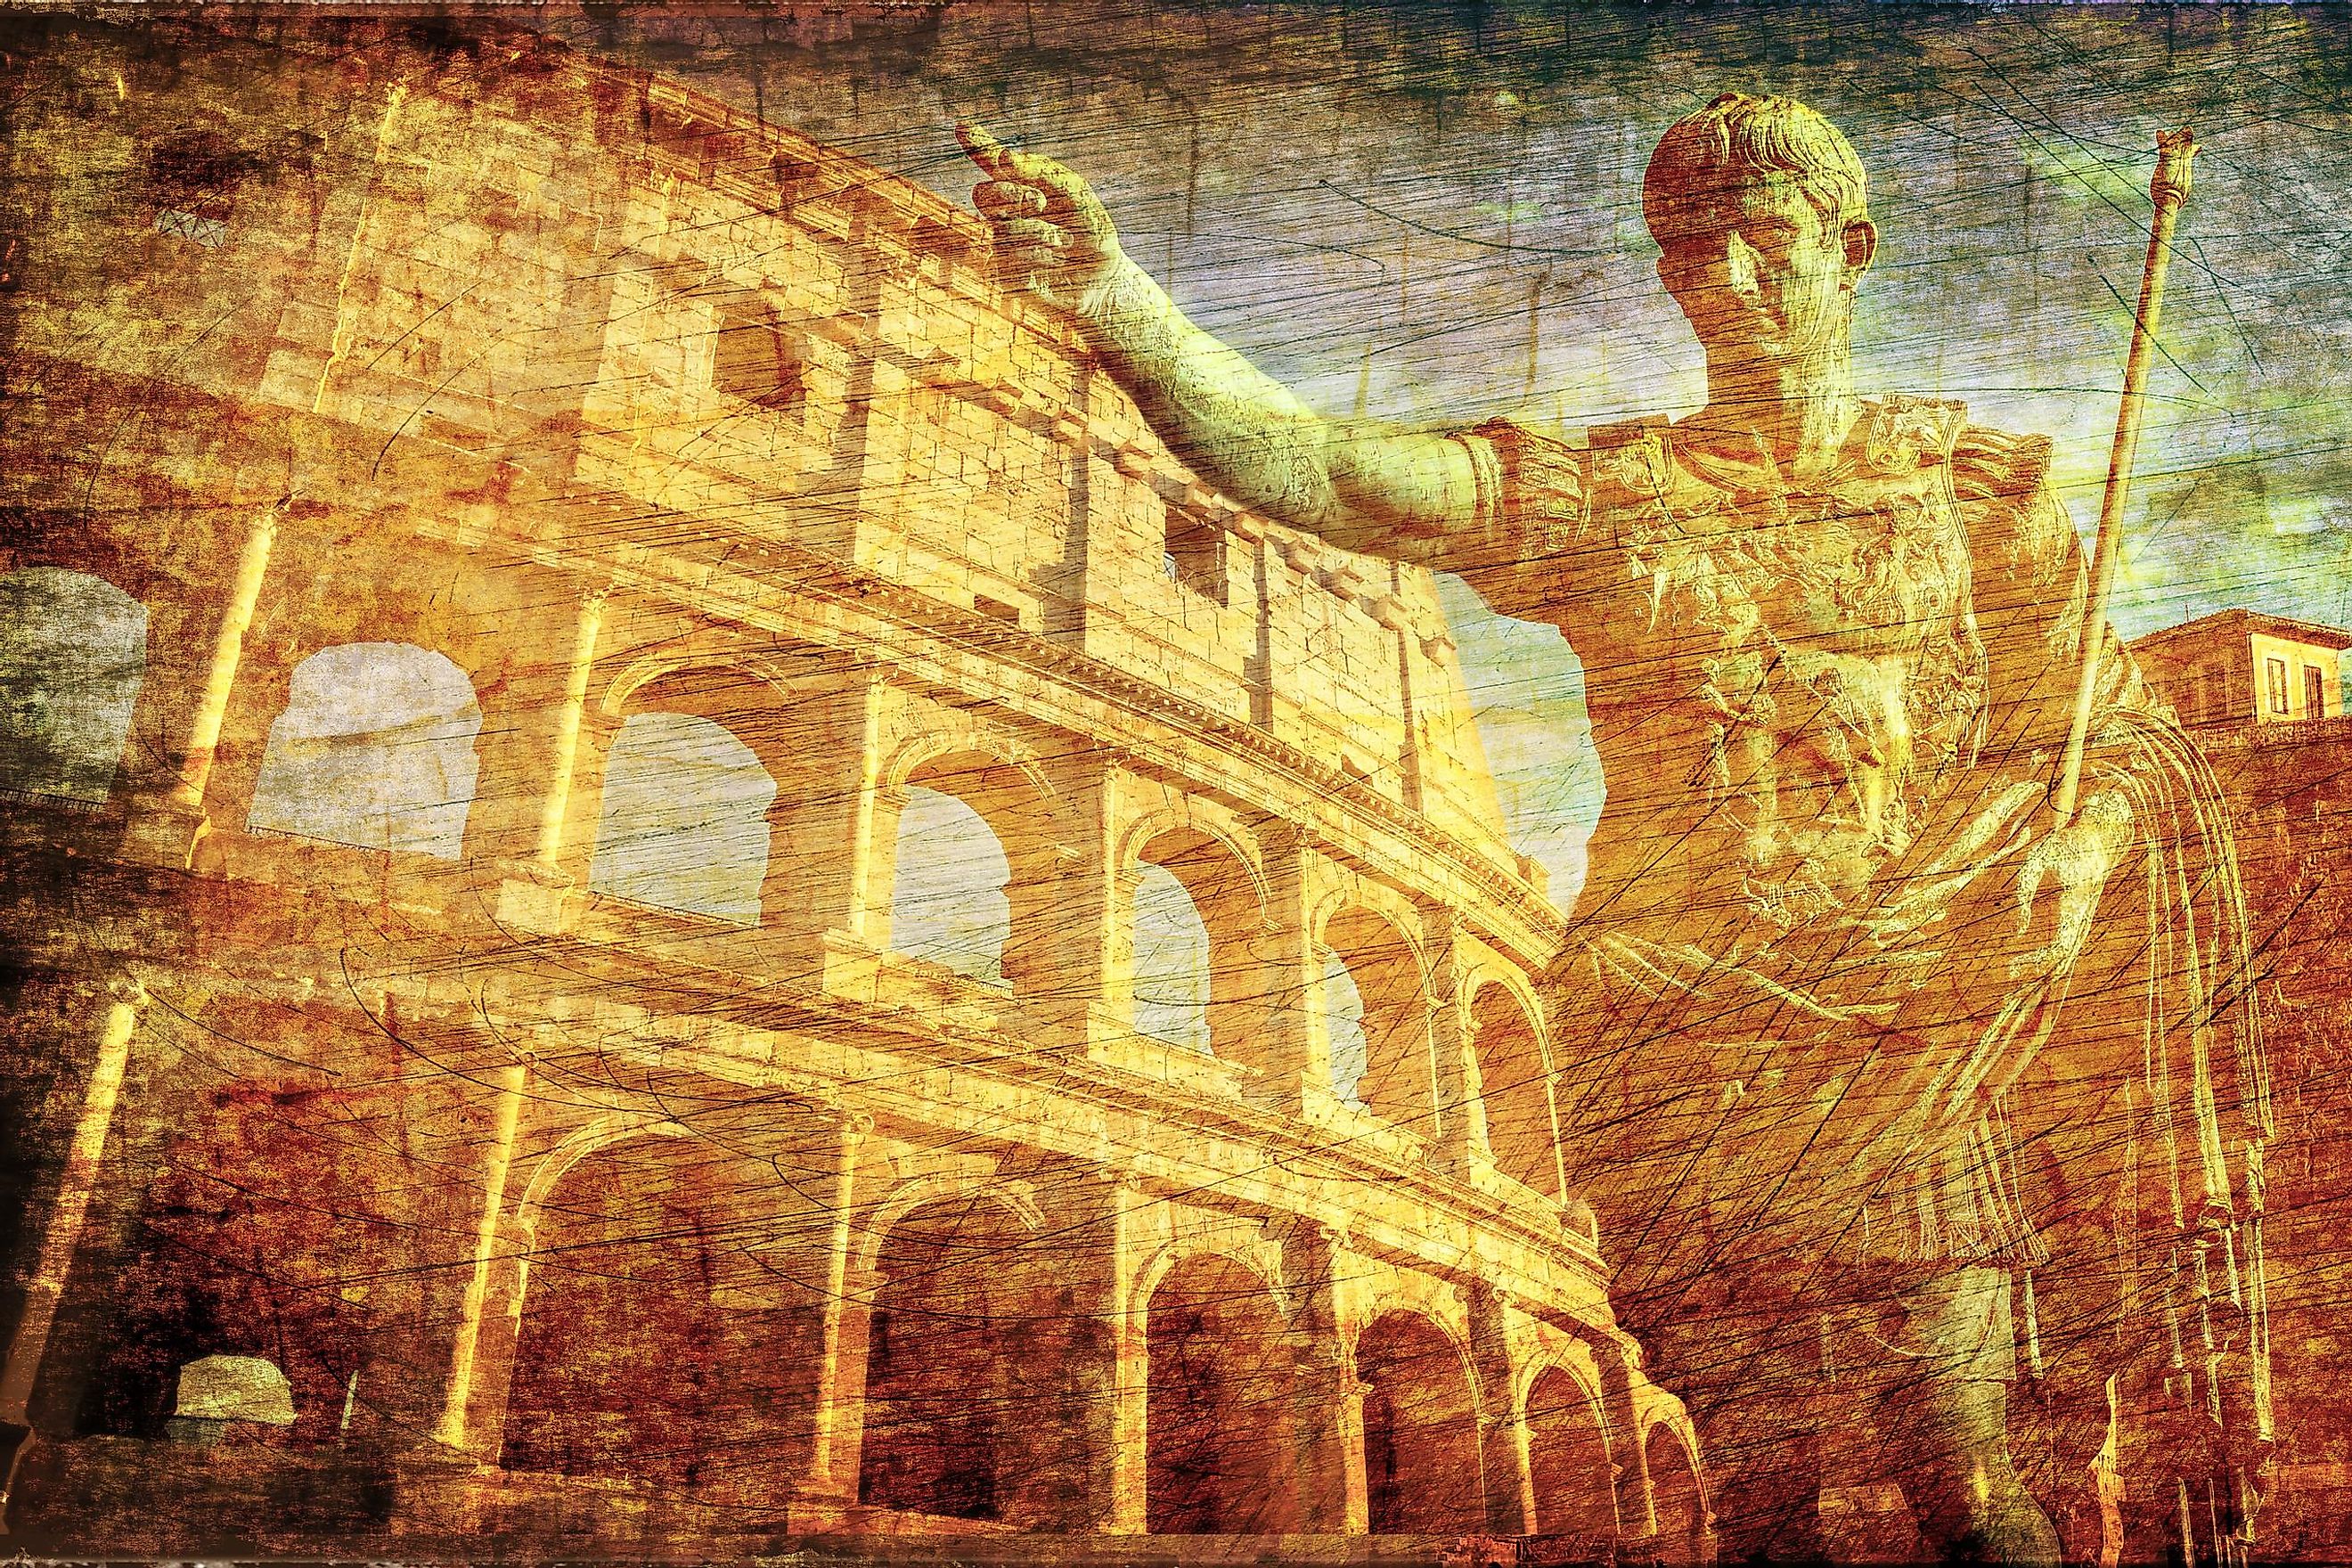 Image of a statue of Augustus in front of the Colosseum. 